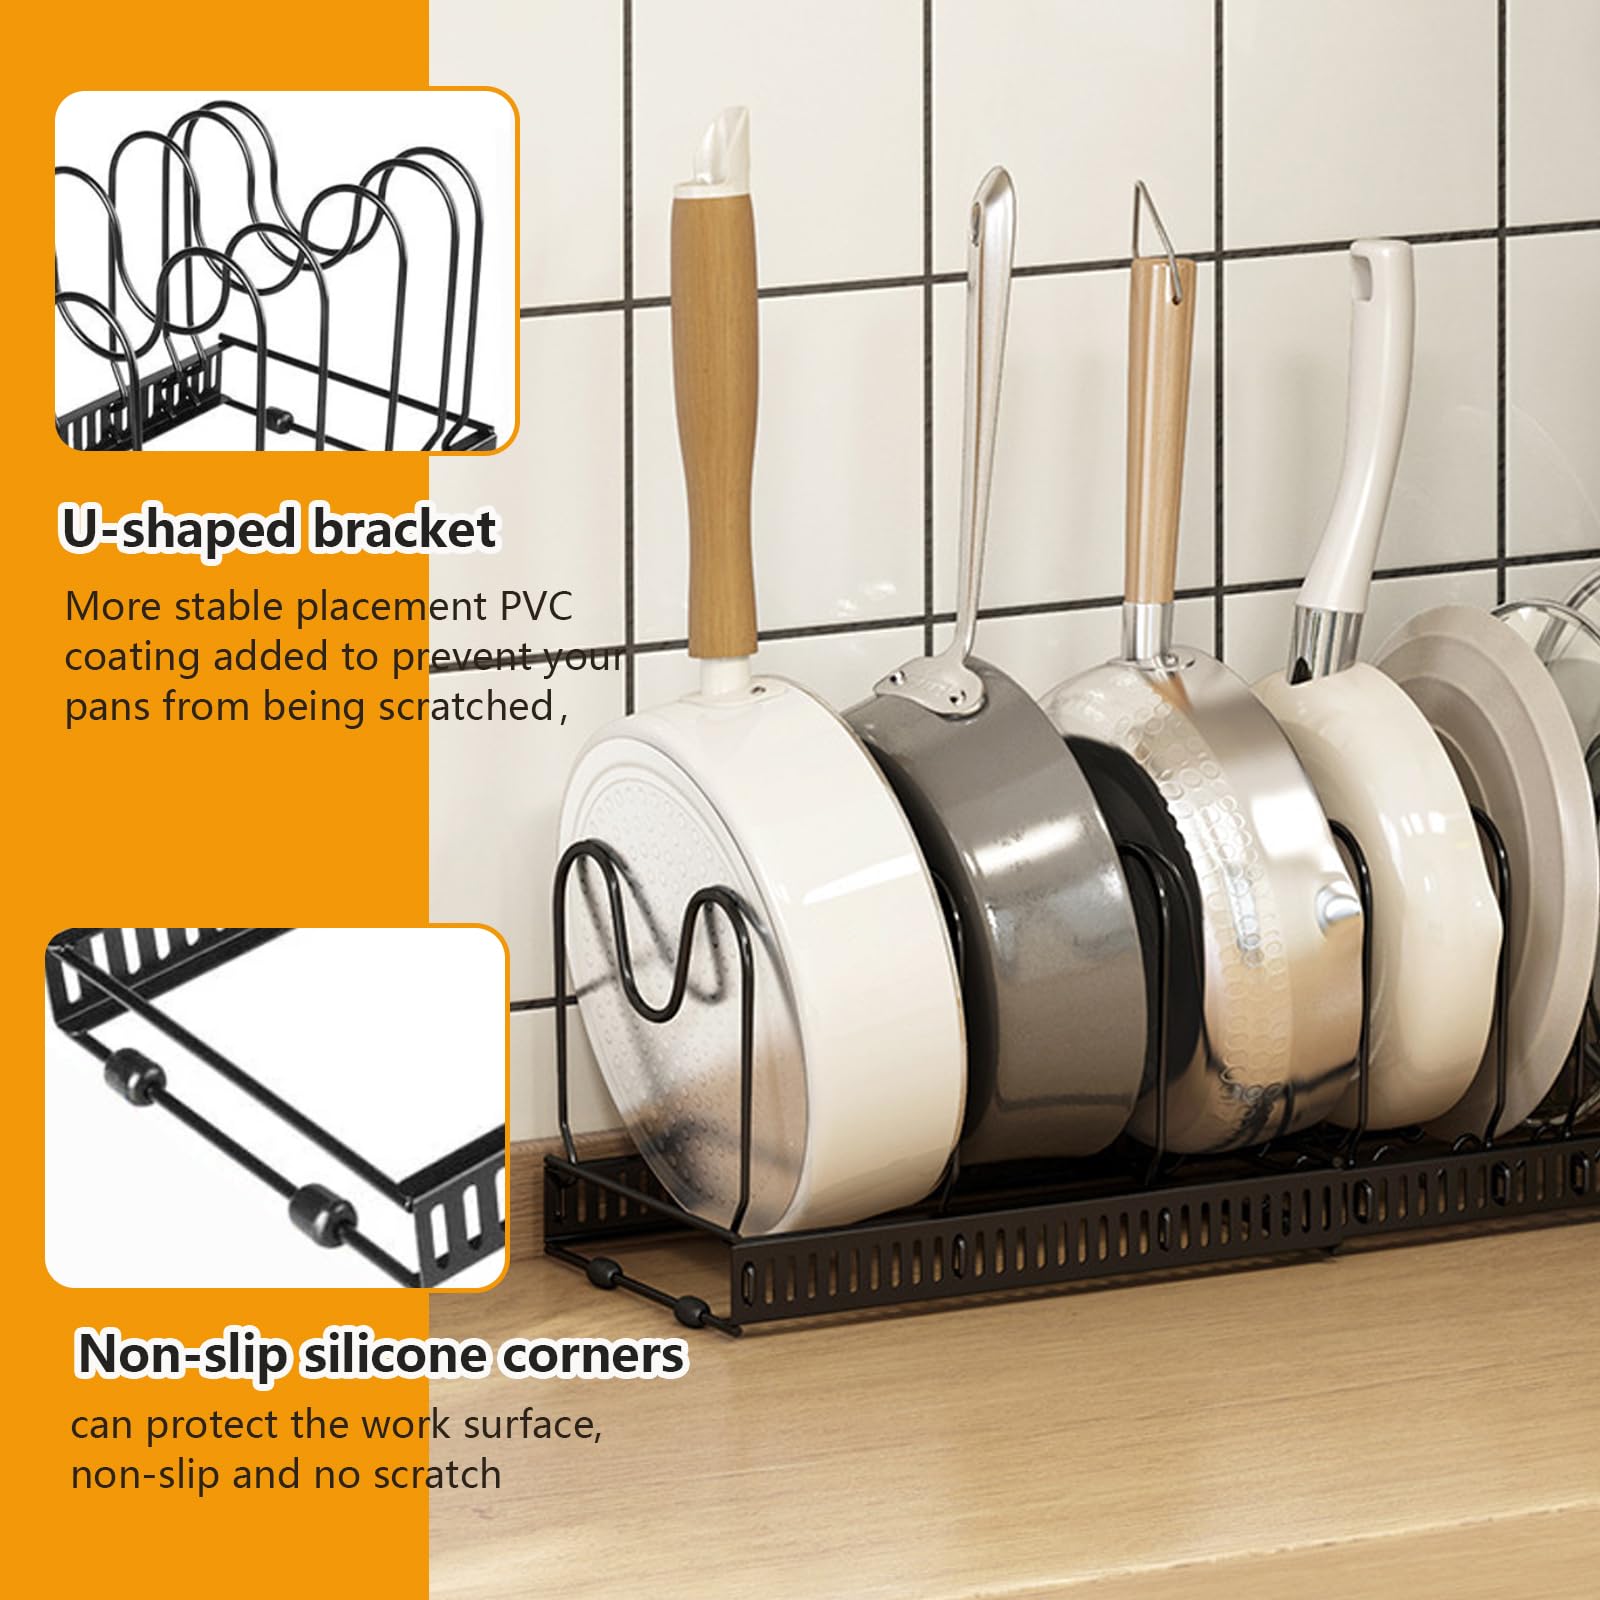 Pots and Pans Organizer, Expandable Pot and Pan Organizer for Cabinet, Pan Organizer Rack for Cabinet with 10 Adjustable Dividers, Pot Lid Organizer, Black Pot Organizer Rack for Under Cabinet